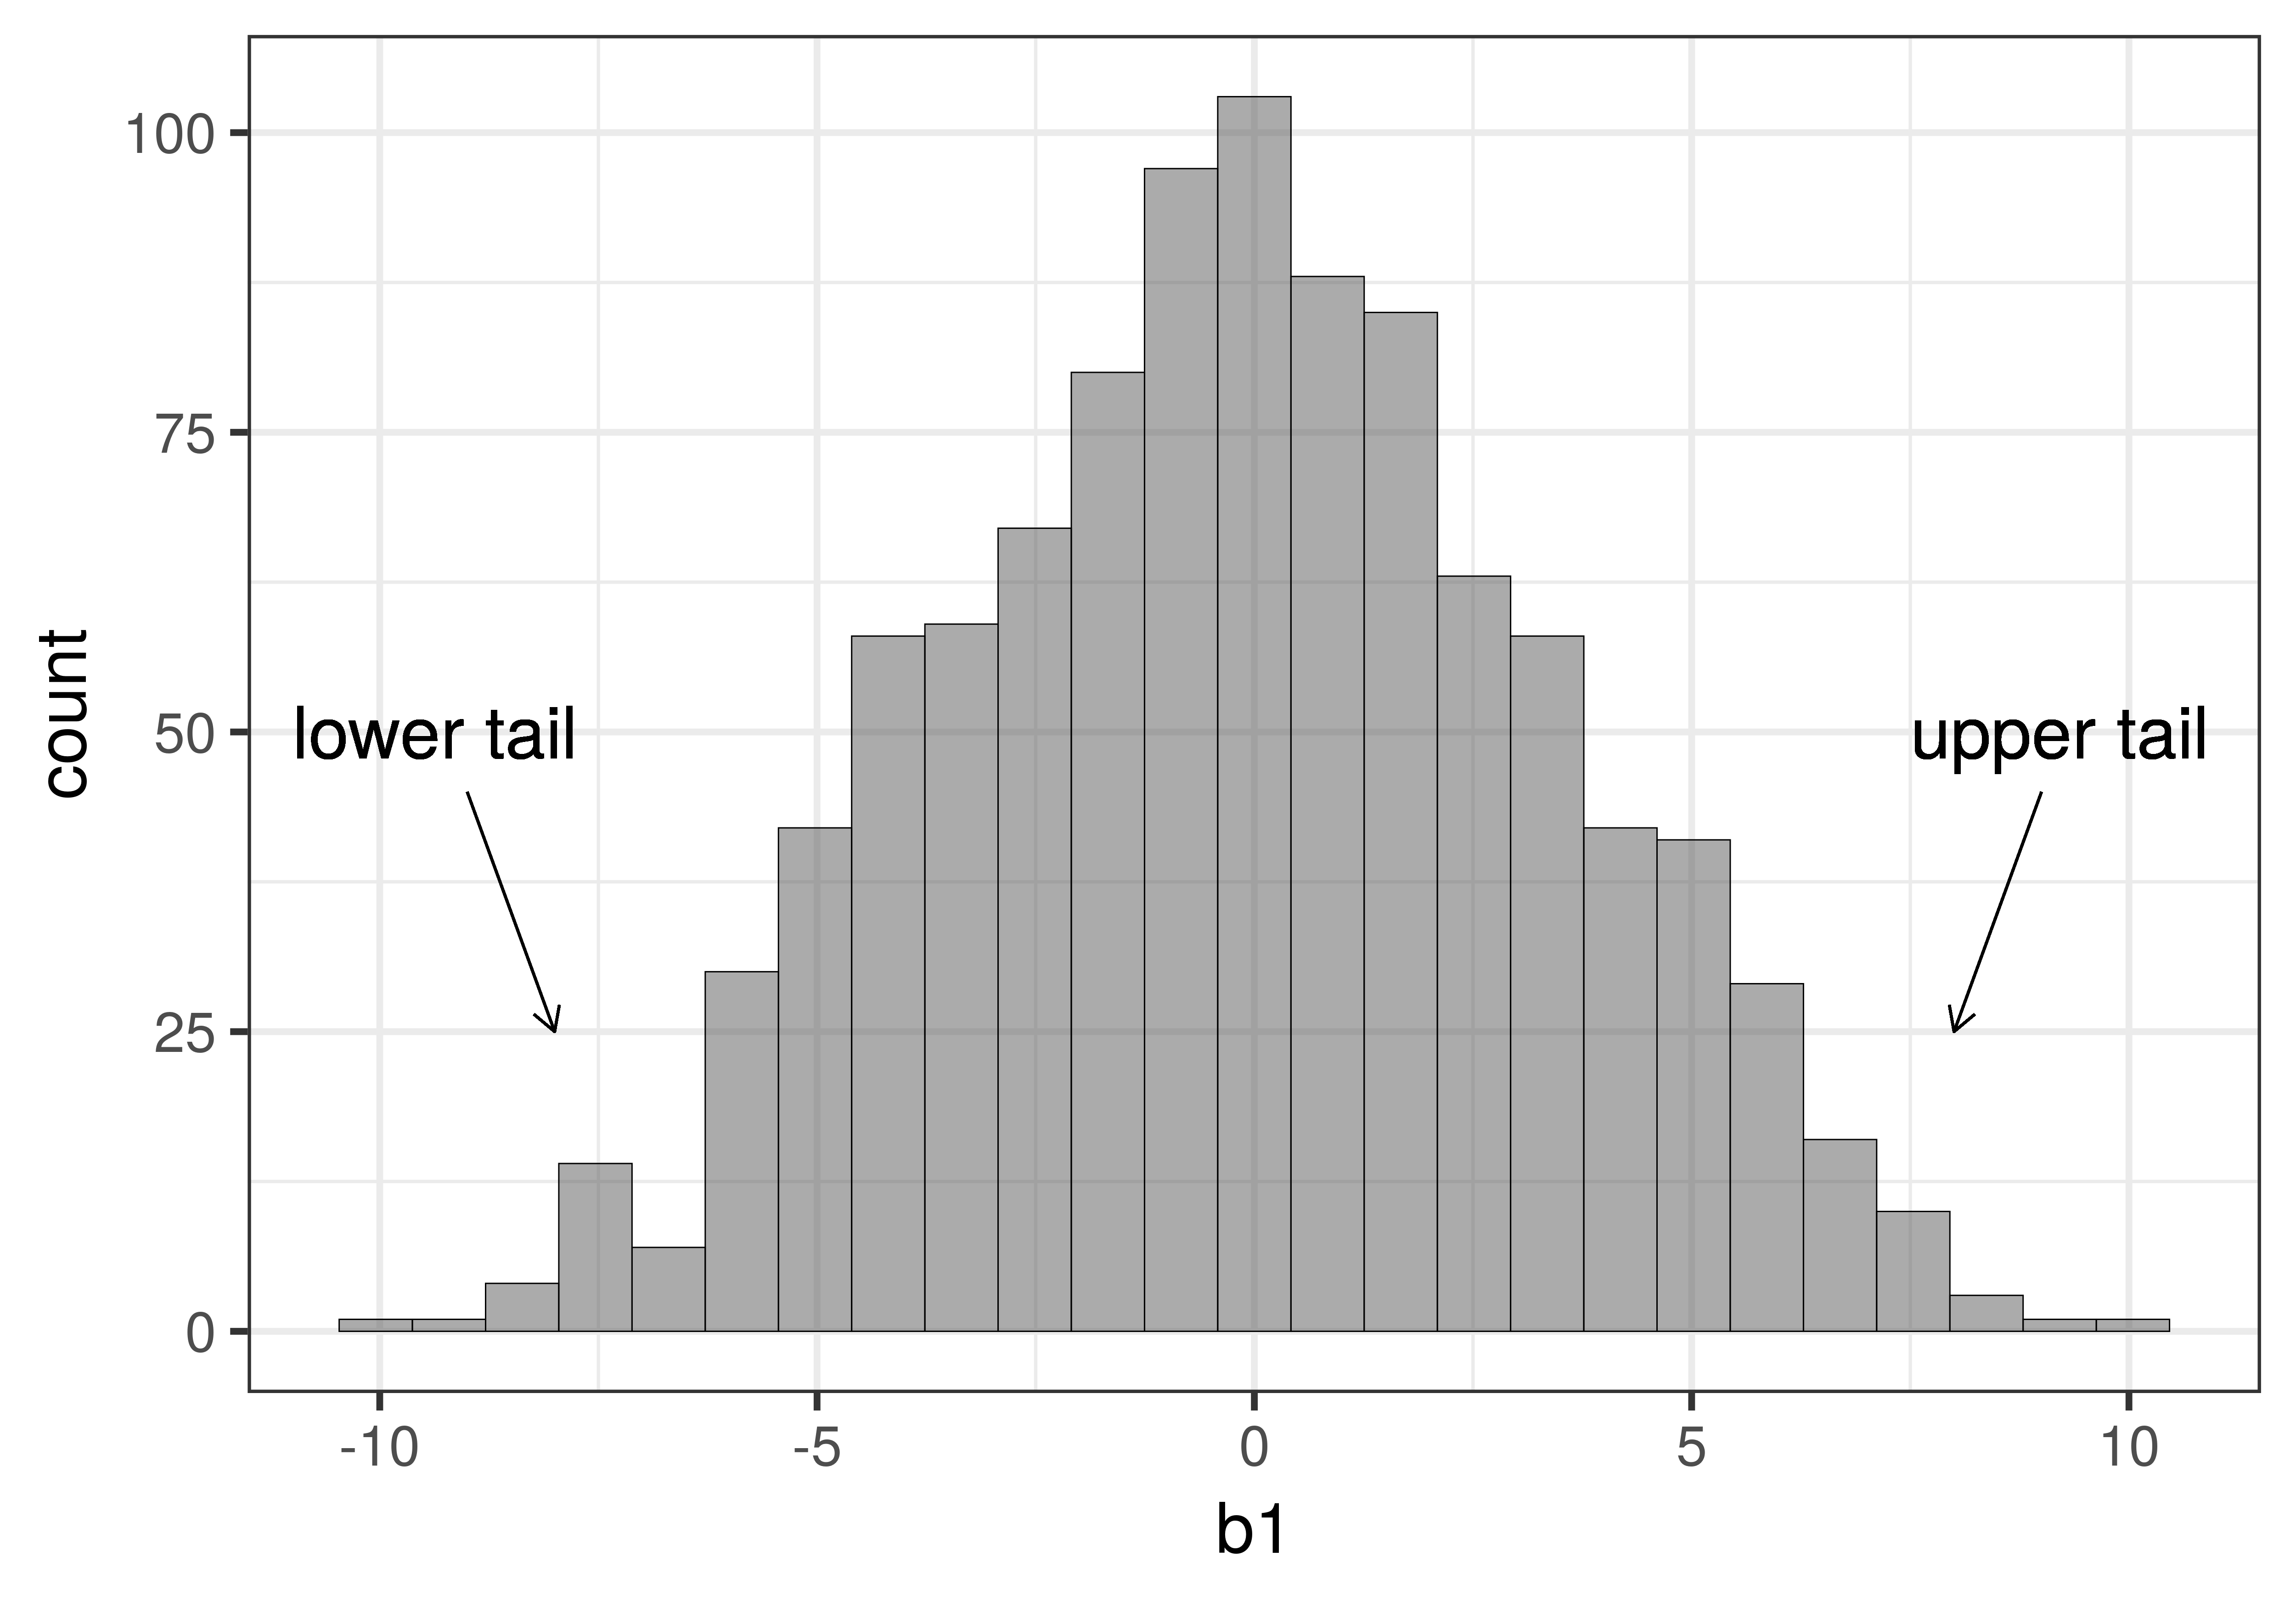 A histogram of b1, with arrows pointing to the lower tail on the left and the upper tail on the right.